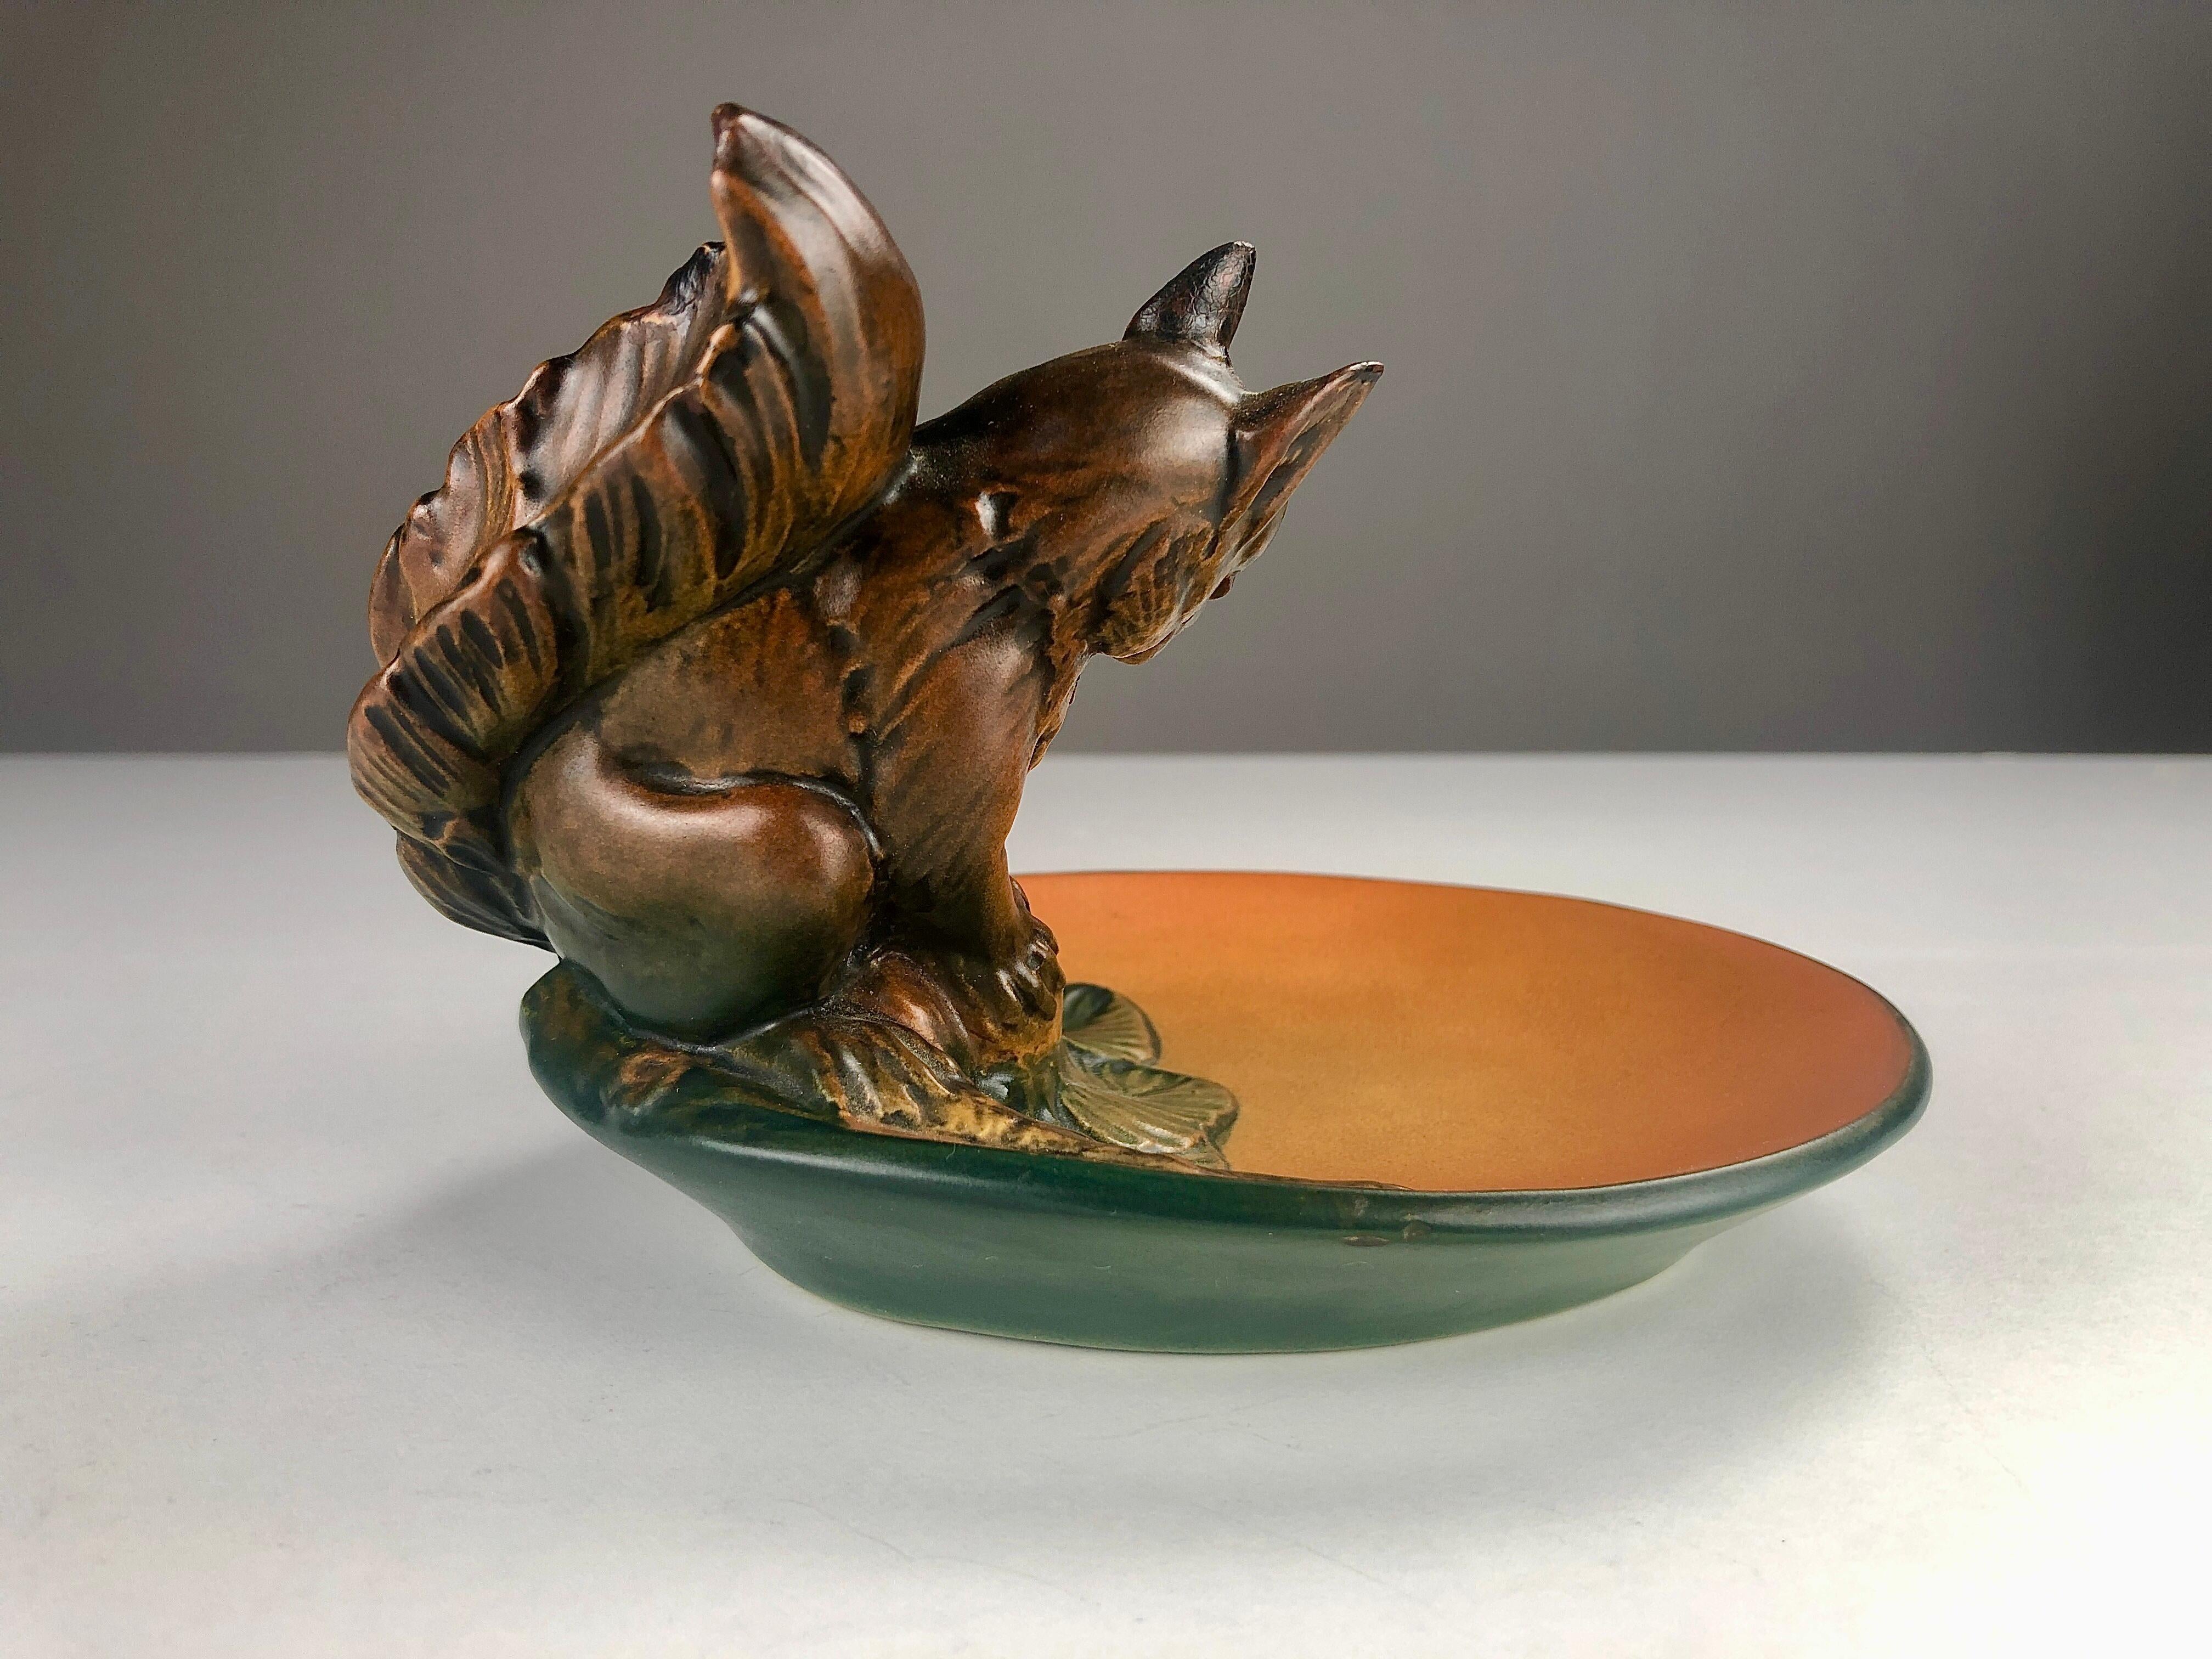 1940's Danish Art Nouveau Ash Tray / Bowl by Axel Sorensen for P. Ipsens Enke In Good Condition For Sale In Knebel, DK